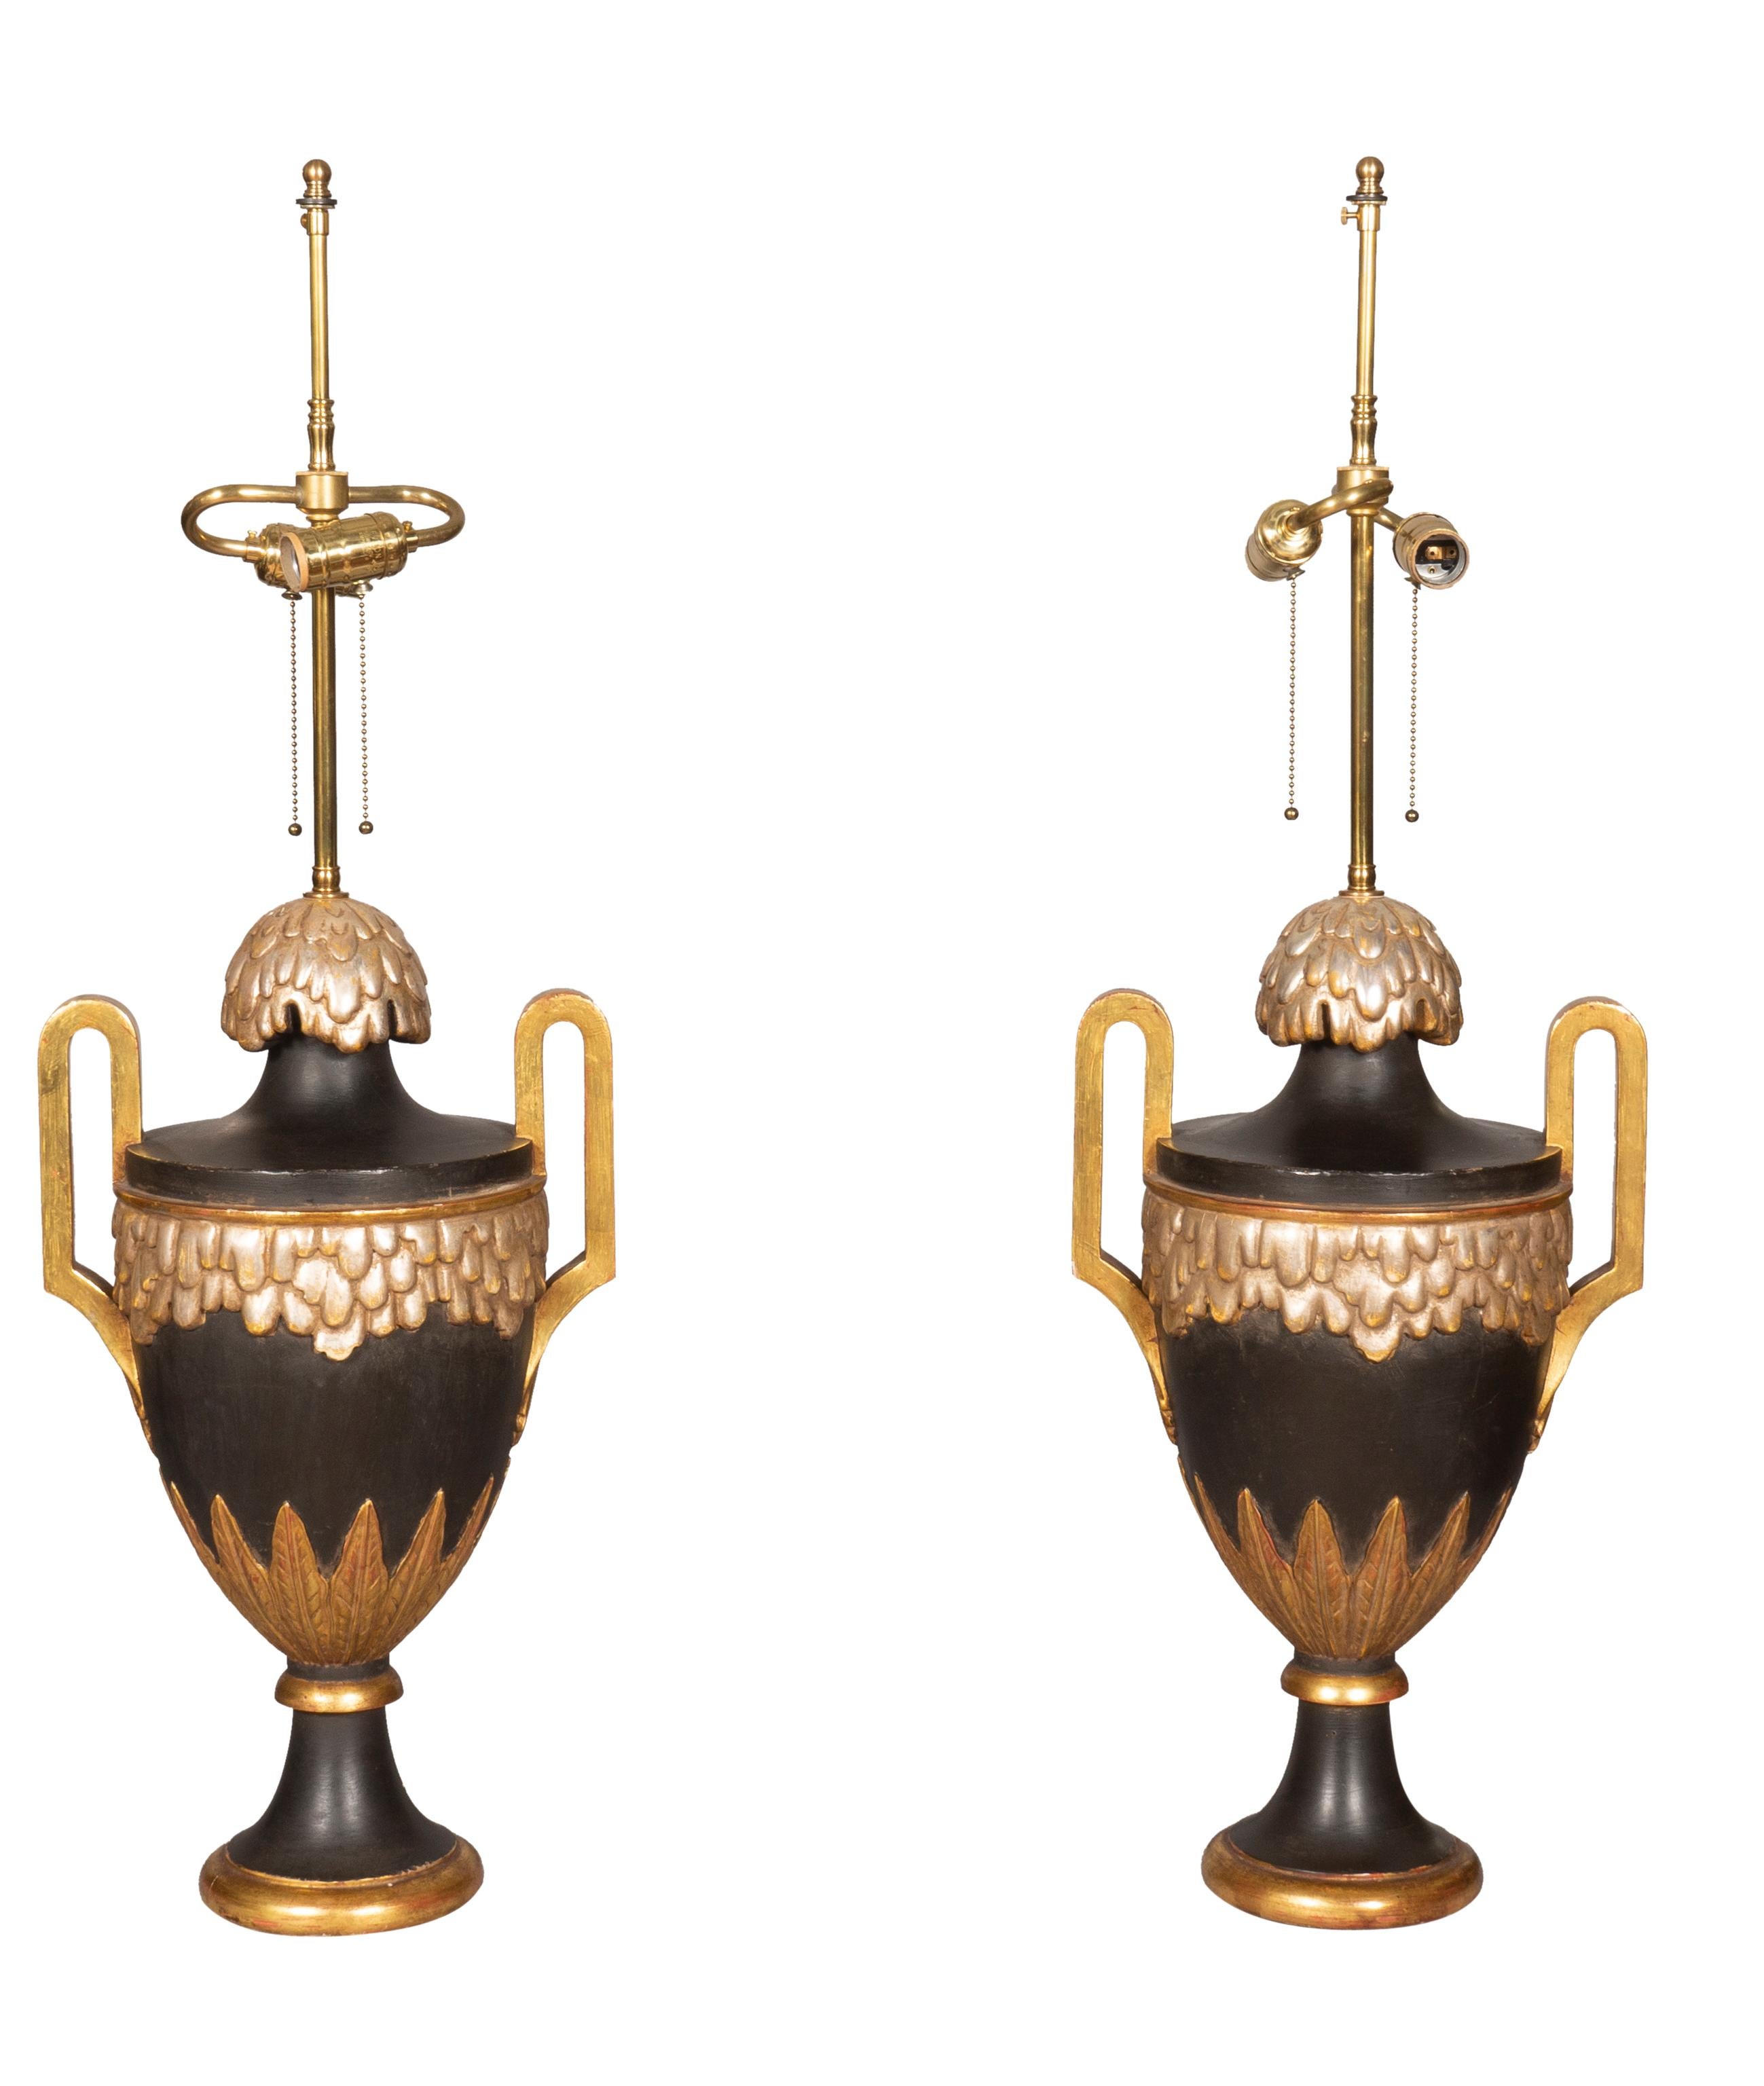 With urn form with bronze and gilded finish and handles, with shades. Estate Of Martin Trust, Boston and Palm Beach.